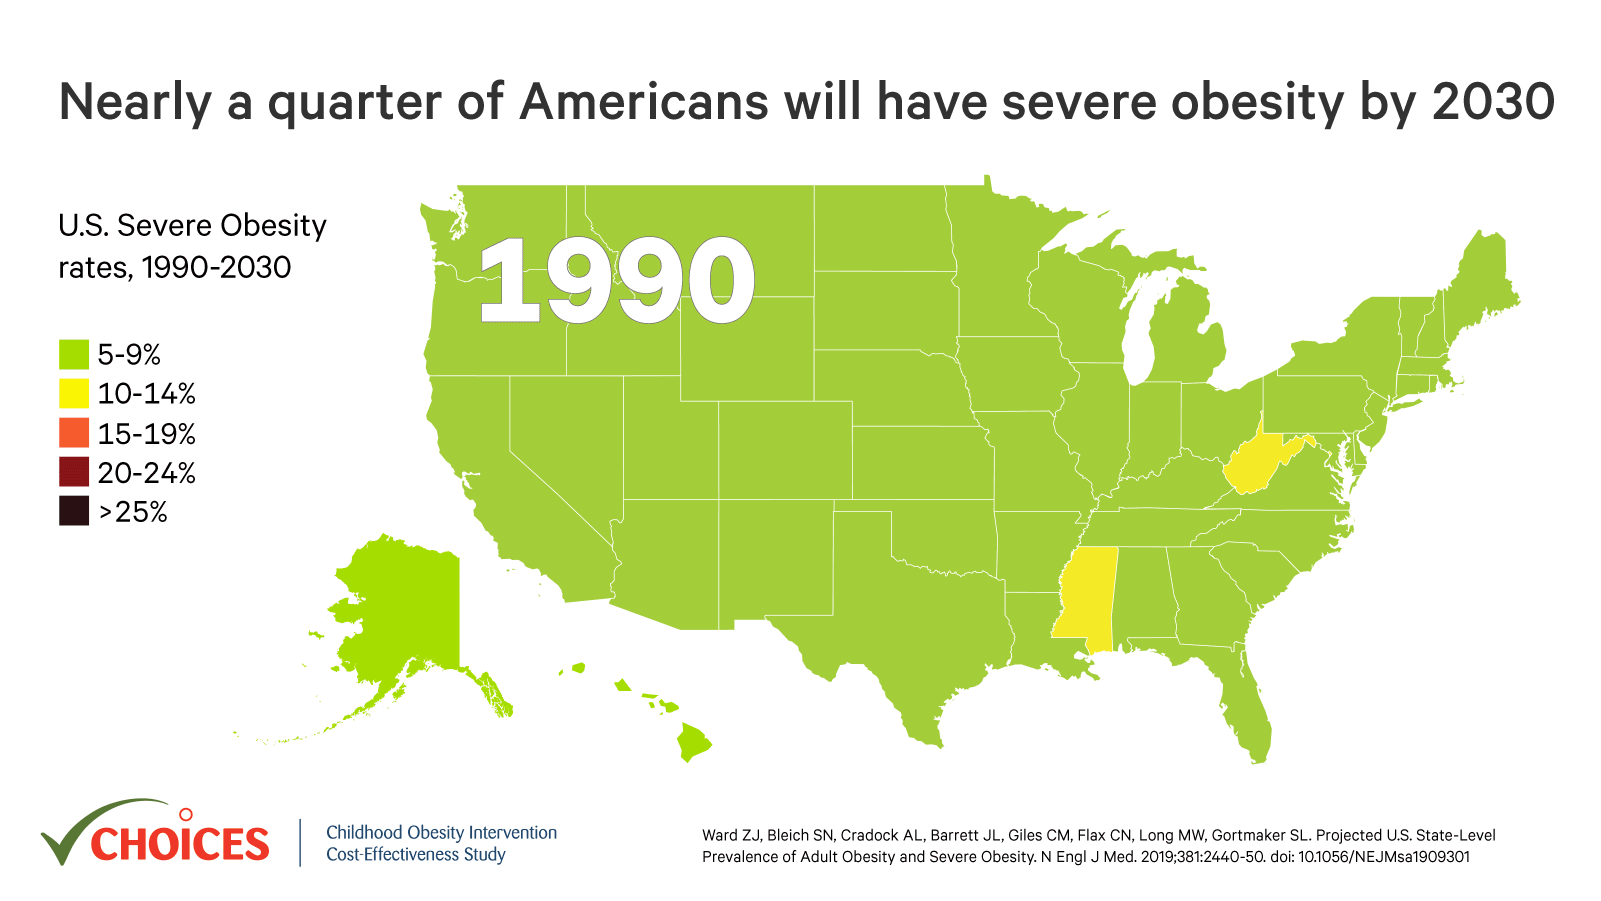 We project that the prevalence of severe obesity (BMI, ≥35) will rise above 25% in 25 states